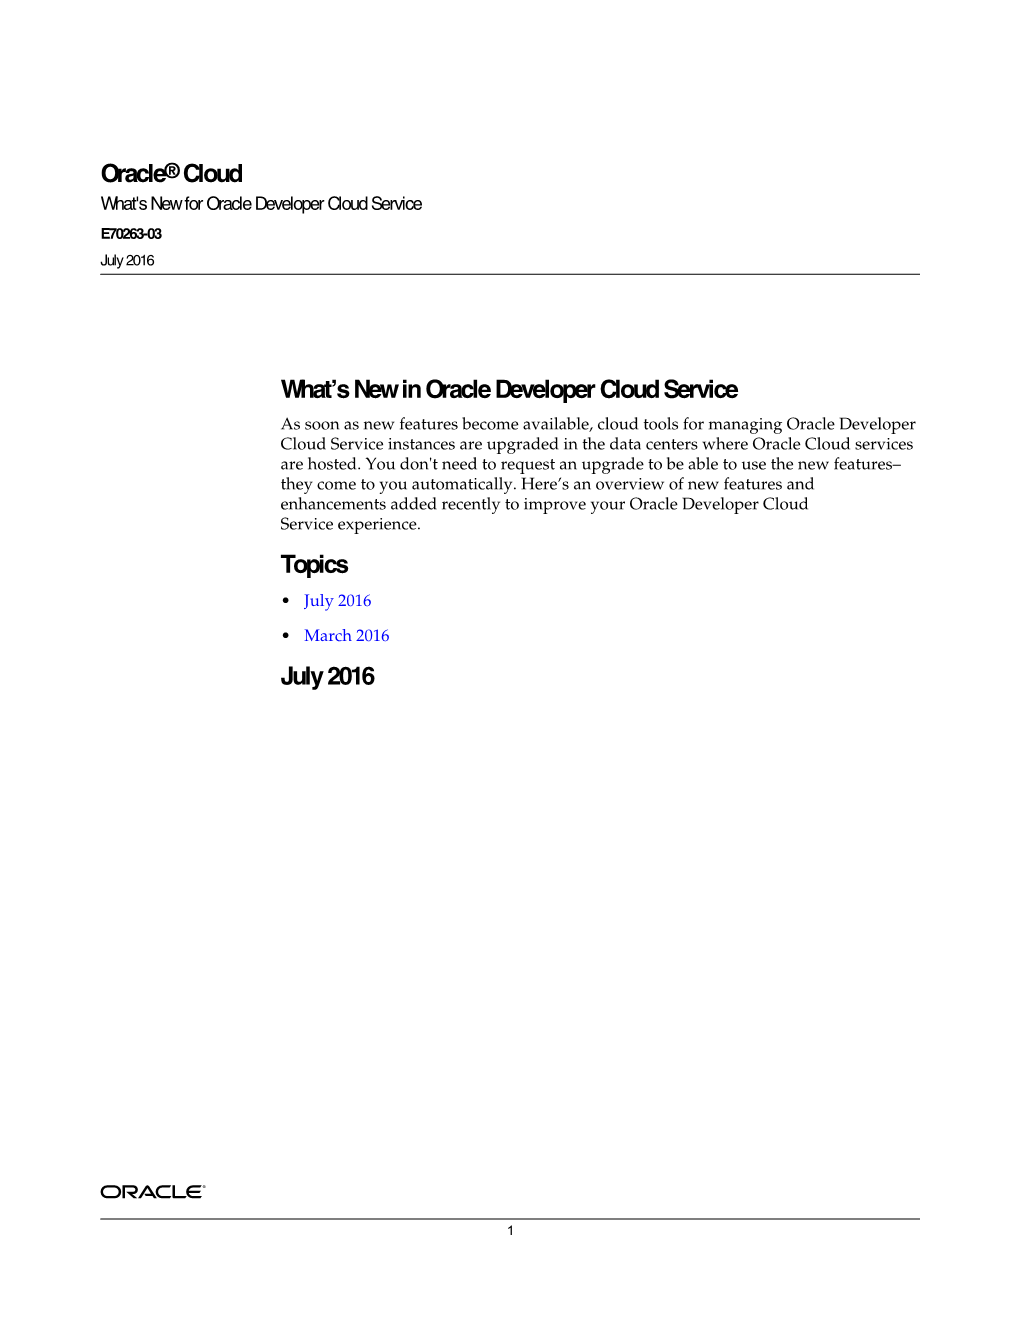 What's New for Oracle Developer Cloud Service E70263-03 July 2016